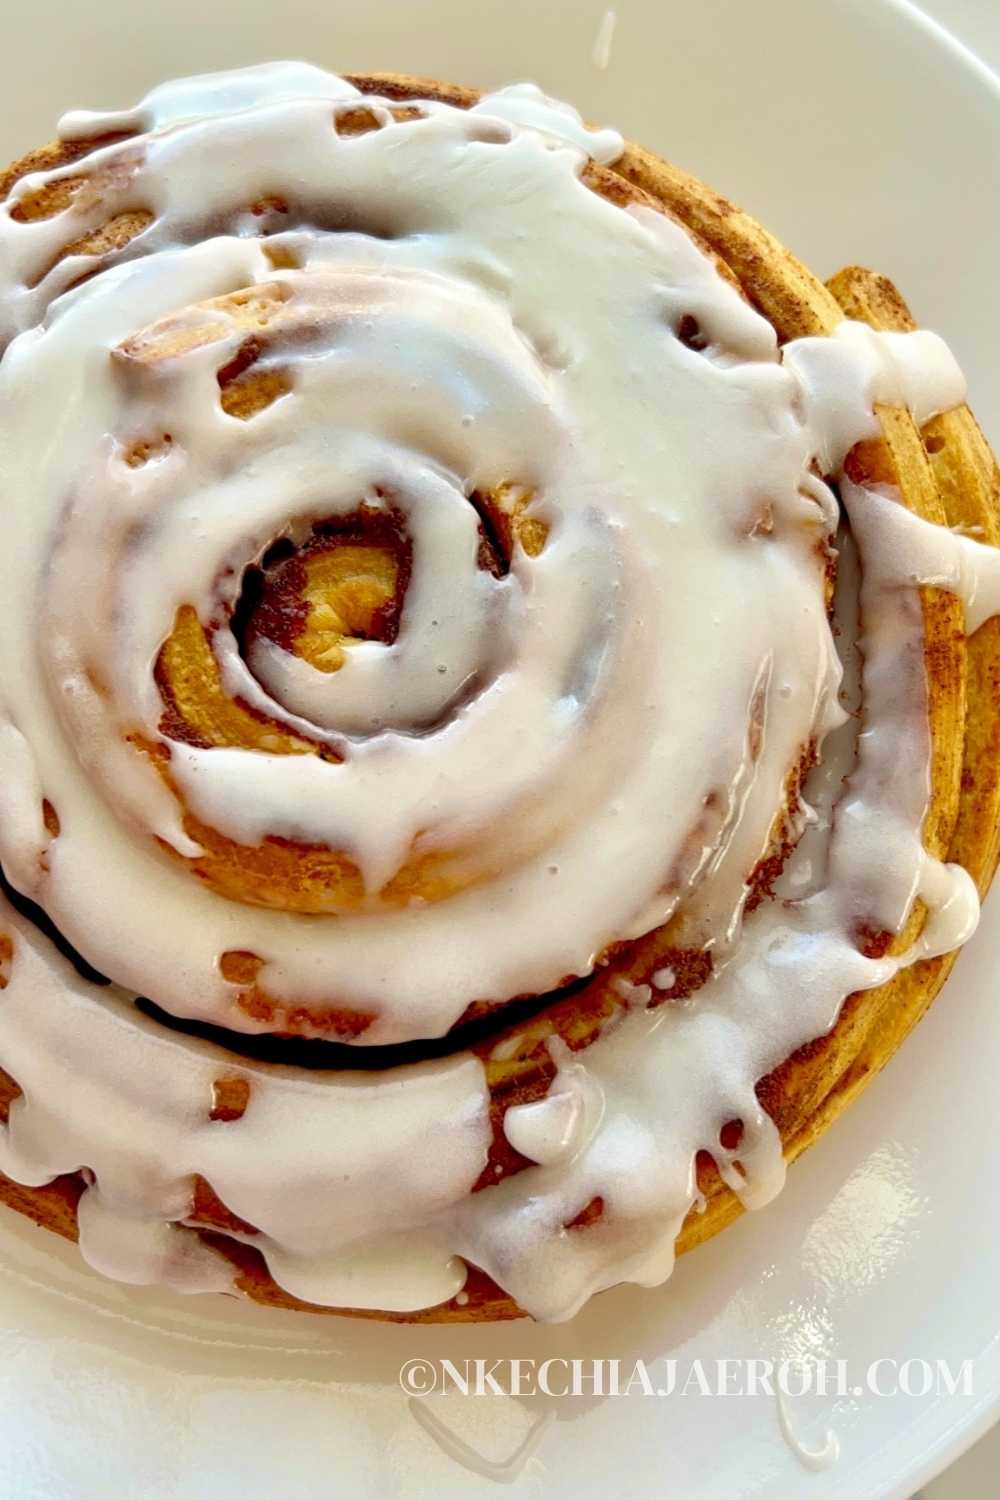 The air fryer giant cinnamon roll is perfect for a weekend breakfast; it is delightful, fun, easy to make, and gorgeous! All you need to make this huge cinnamon roll is a can of Pillsbury deluxe cinnamon rolls and your air fryer. I really love the idea of a cake-looking cinnamon roll. And the best part is that making extra-large cinnamon rolls in the air fryer requires only one ingredient! #Giantcinnamonroll #extralargecinnamonroll #cinnamonrolls #airfryercinnamonroll #airfryerrolls